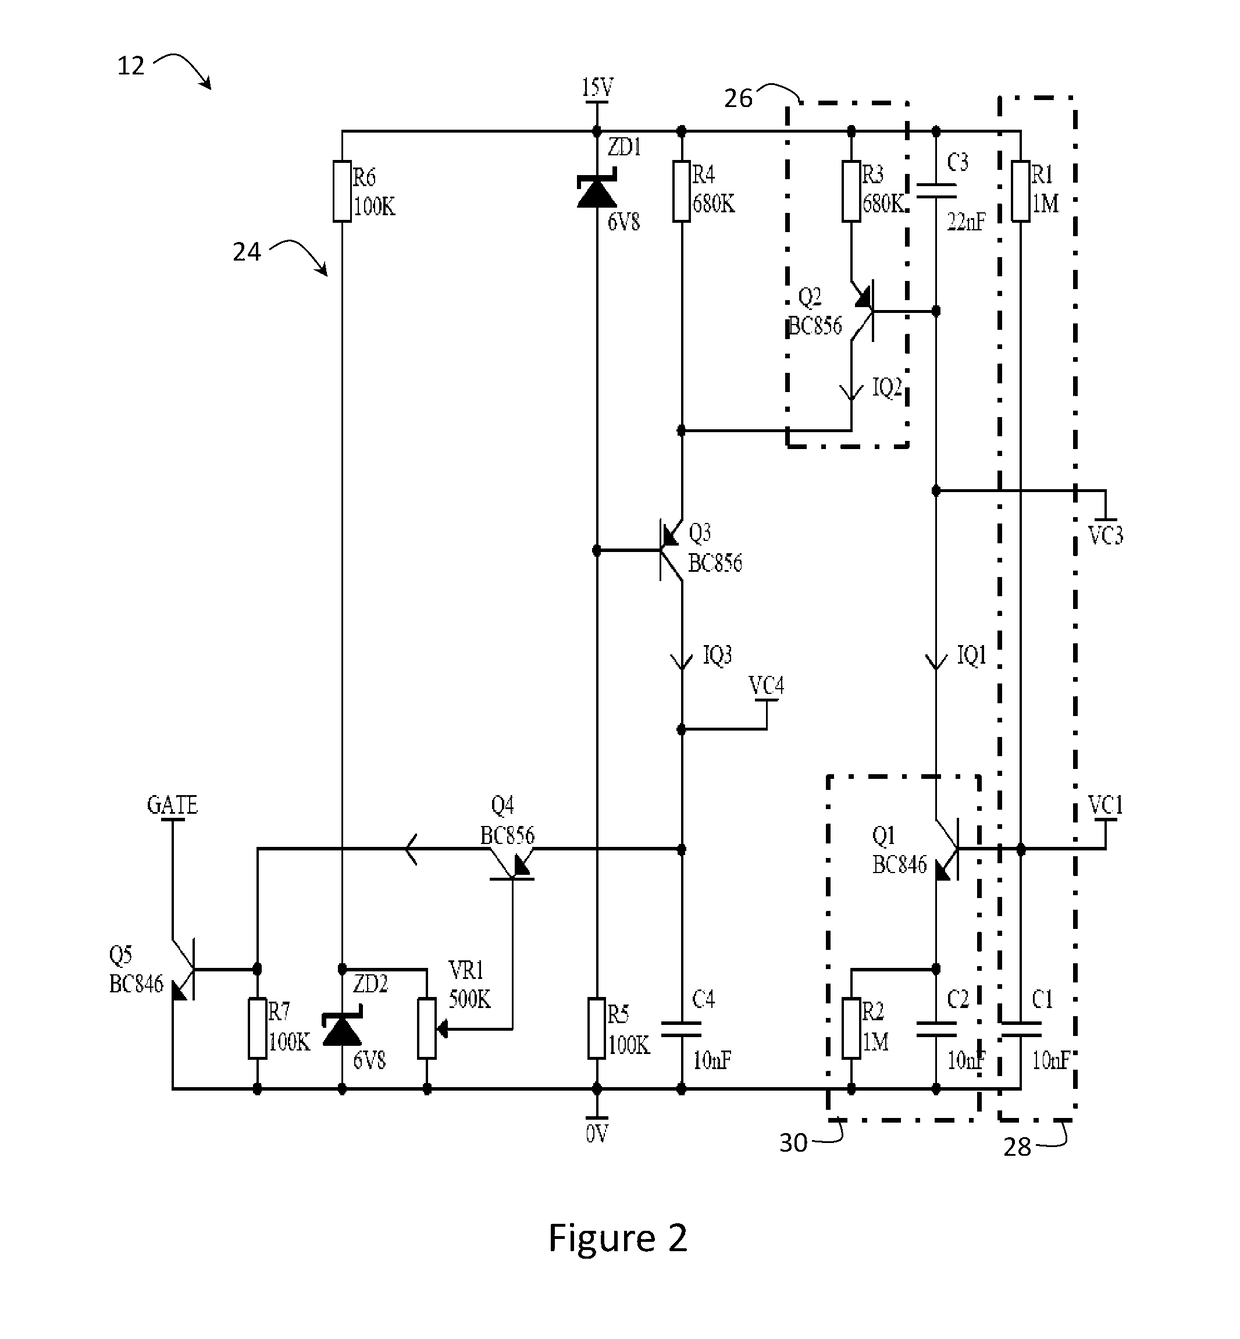 Symmetry control circuit of a trailing edge phase control dimmer circuit